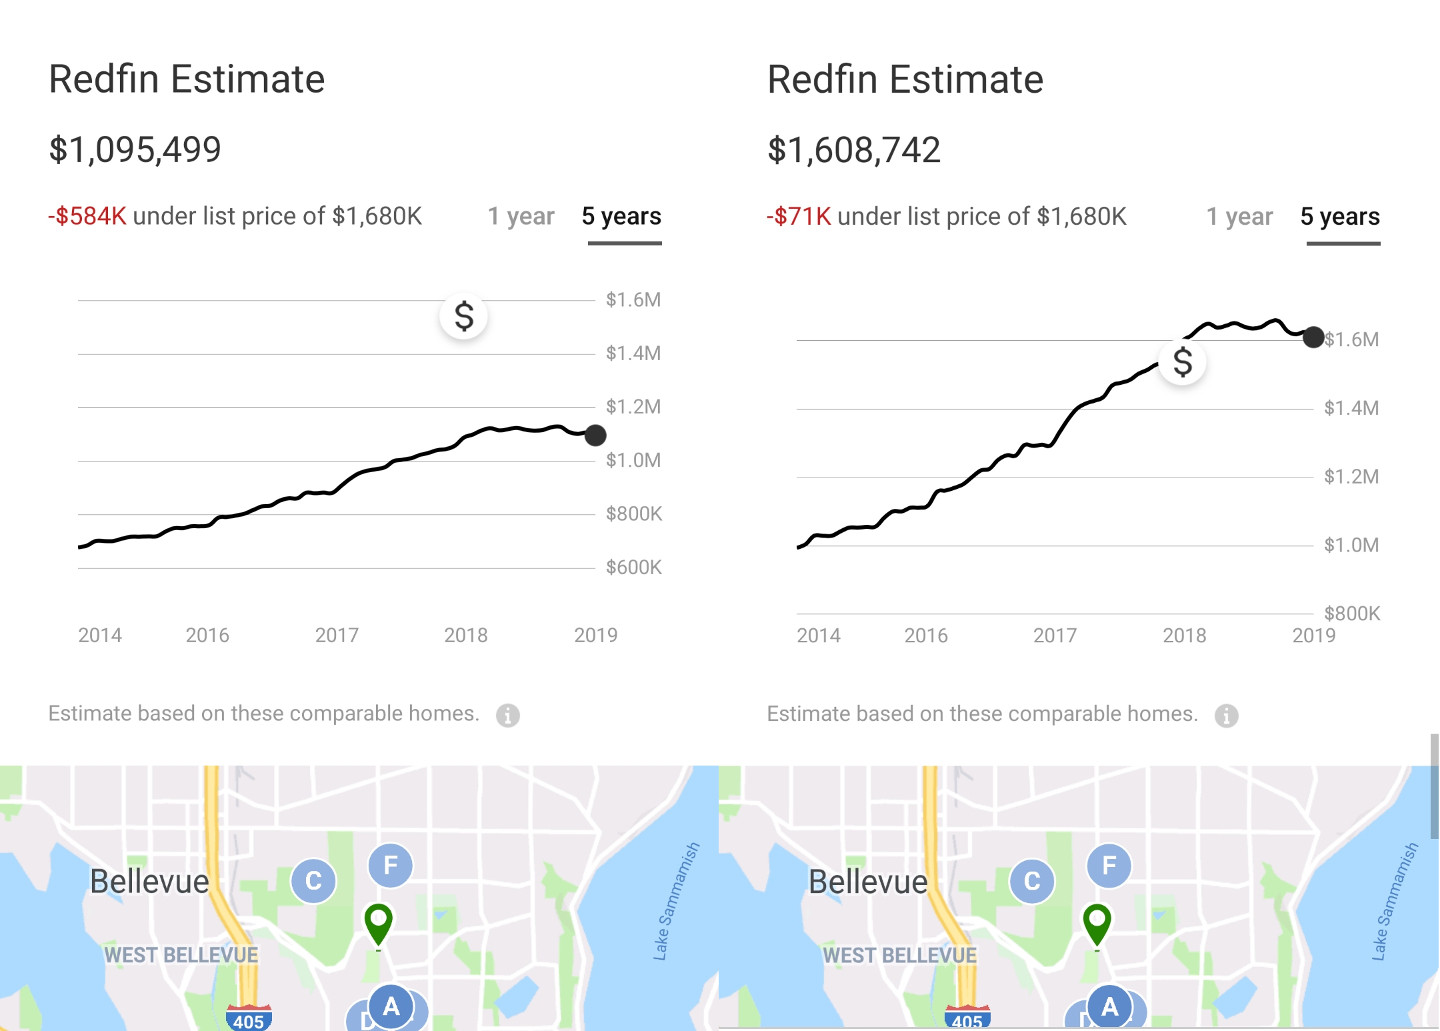 Redfin Estimate at $1,095,499 on 09/27/2019 (left) vs. $1,608,742 on 09/28/2019 (right)